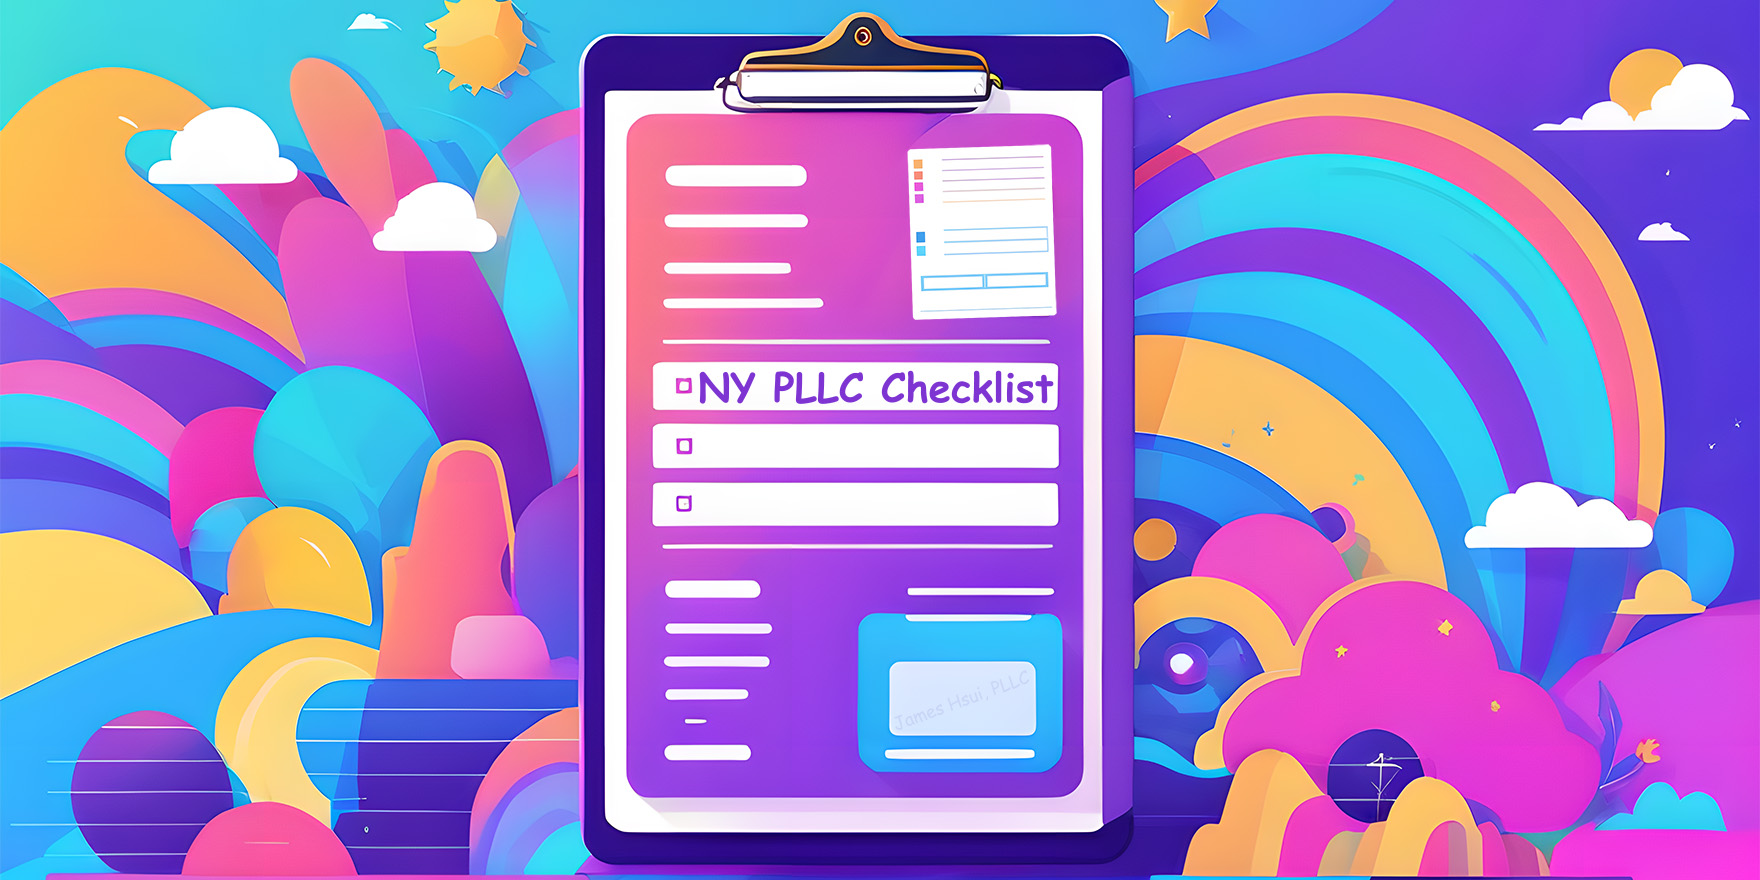 Clipboard with checkboxes and the words 'NY PLLC Checklist'